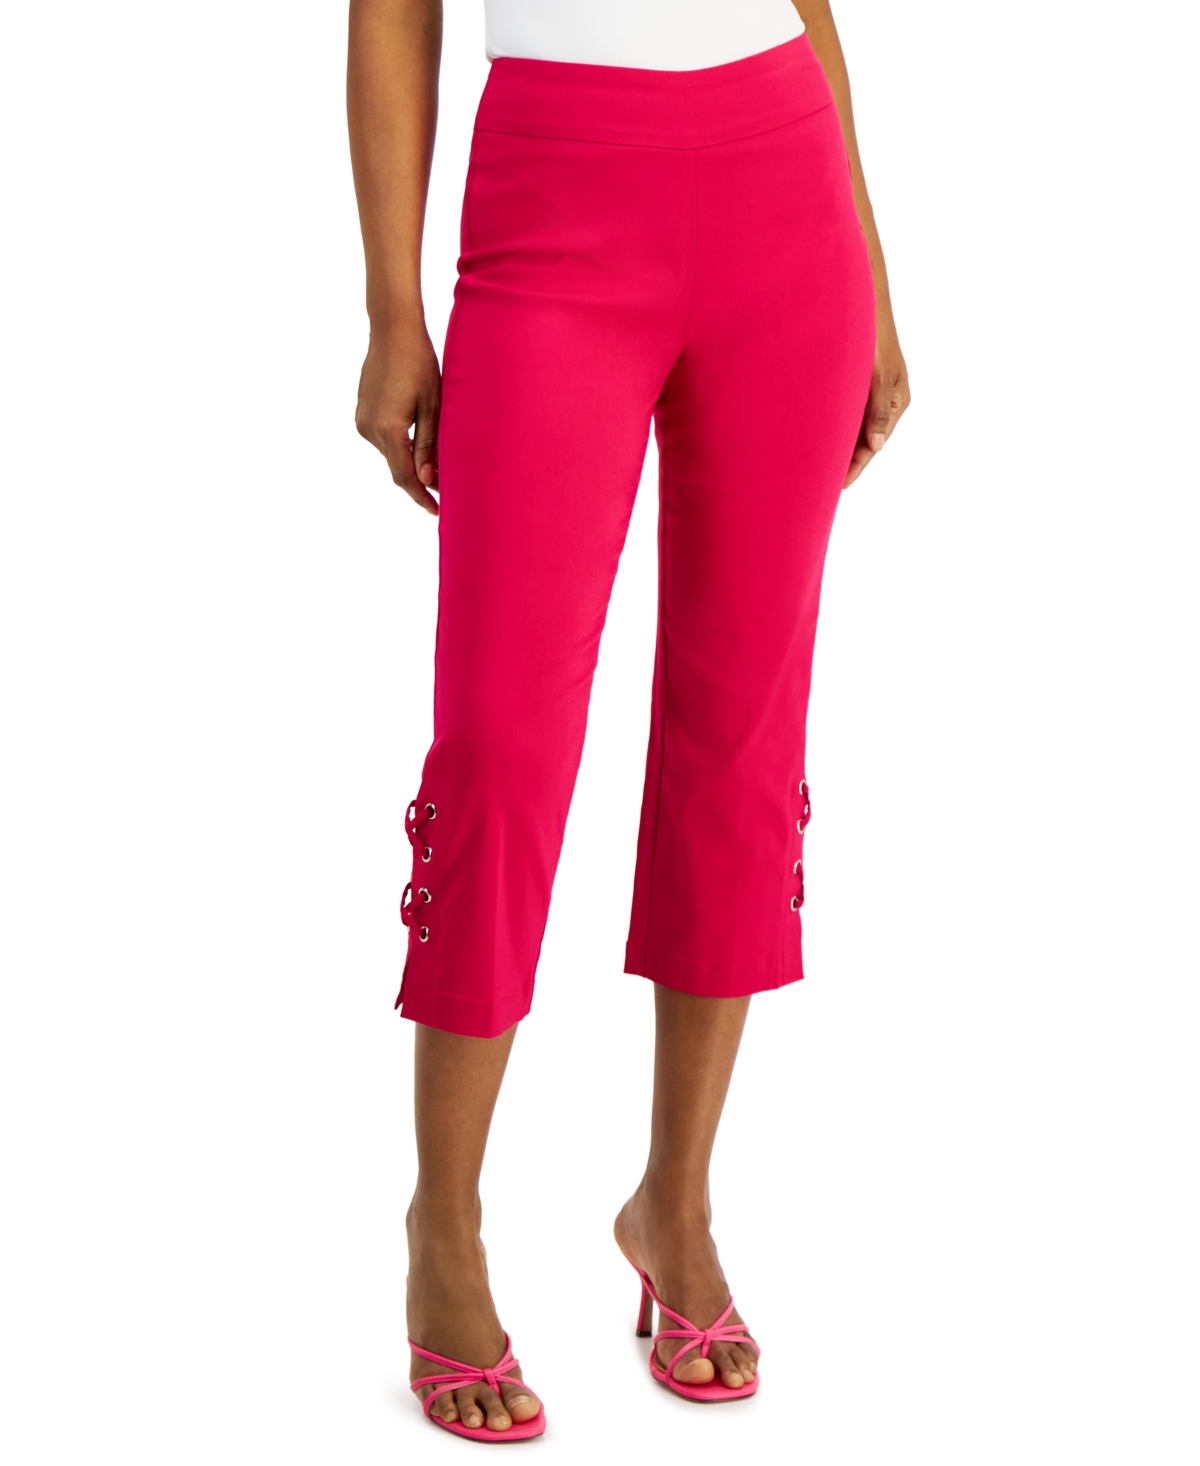 Petite Side-Lace-Up Capri Pants, Created for Macy's - Cheerful Tangerine